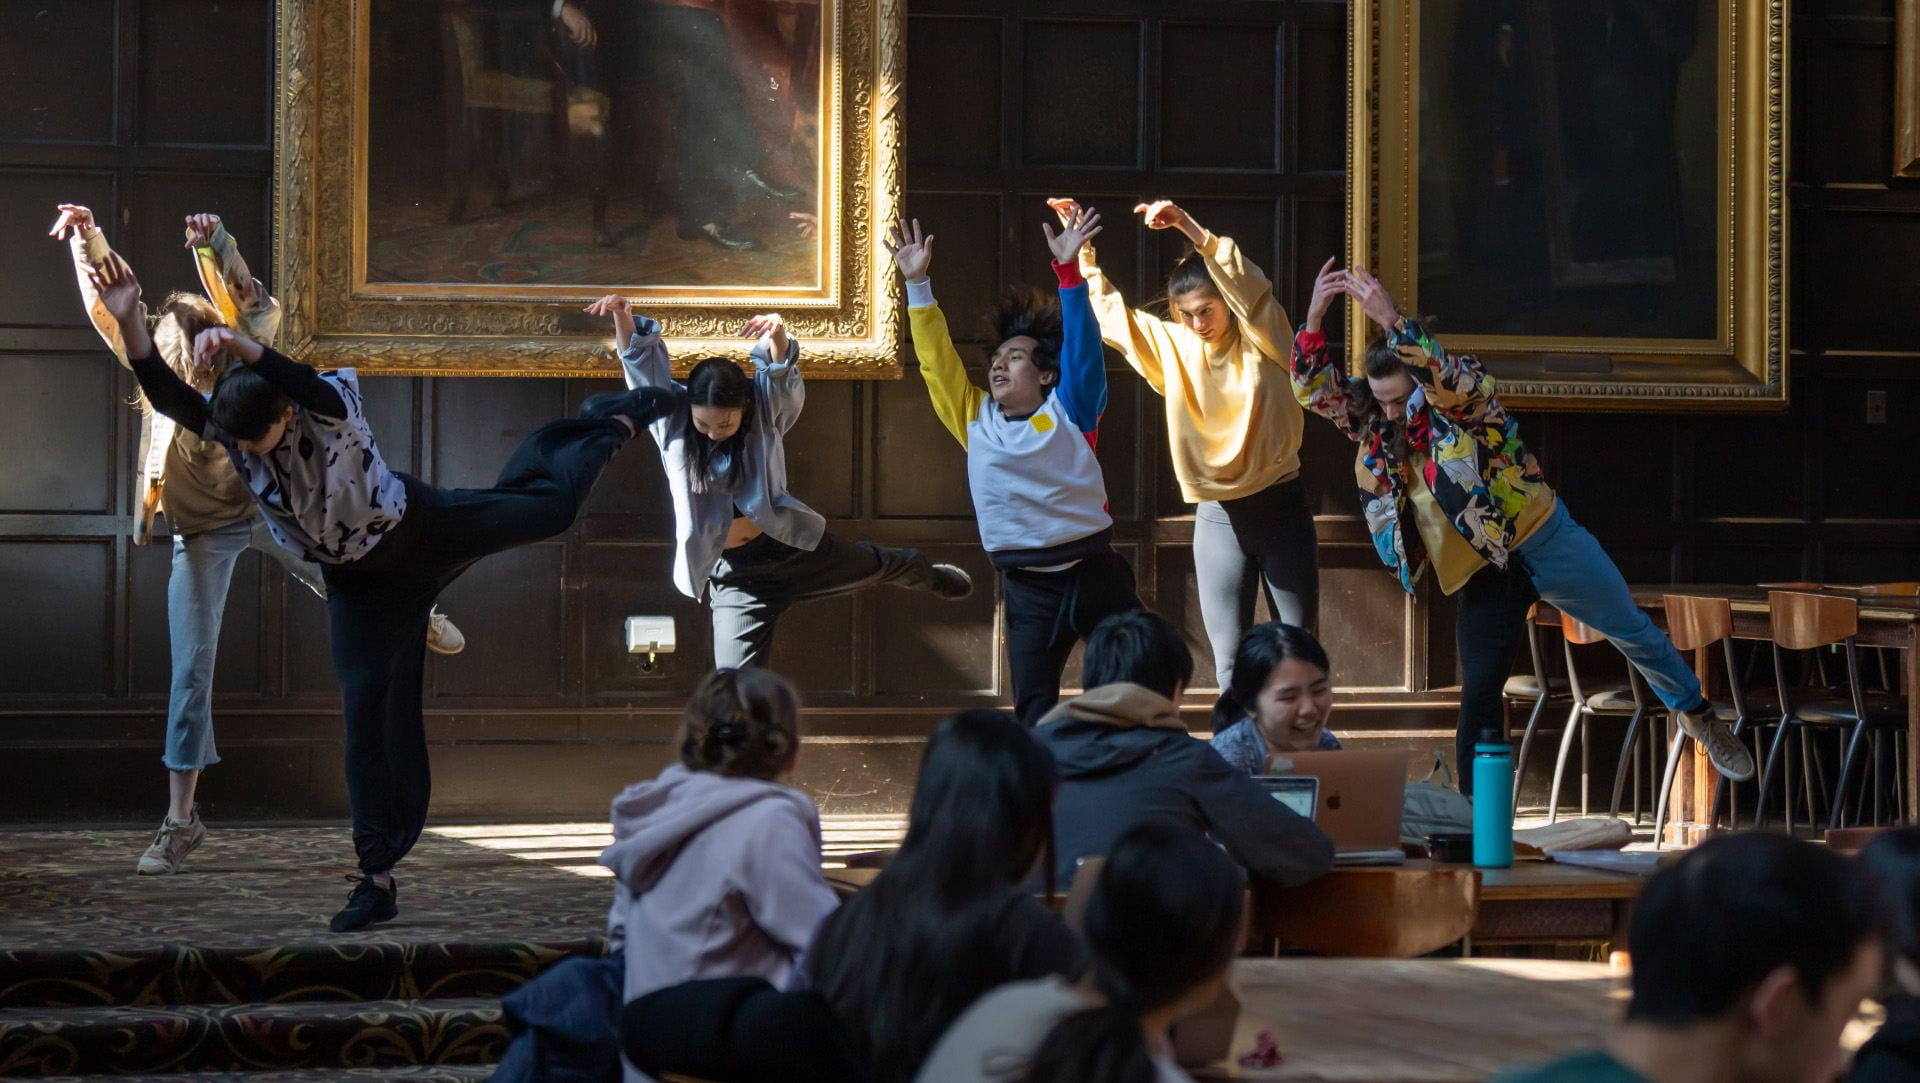 Six students reach upwards during a dance performance in a wood paneled room